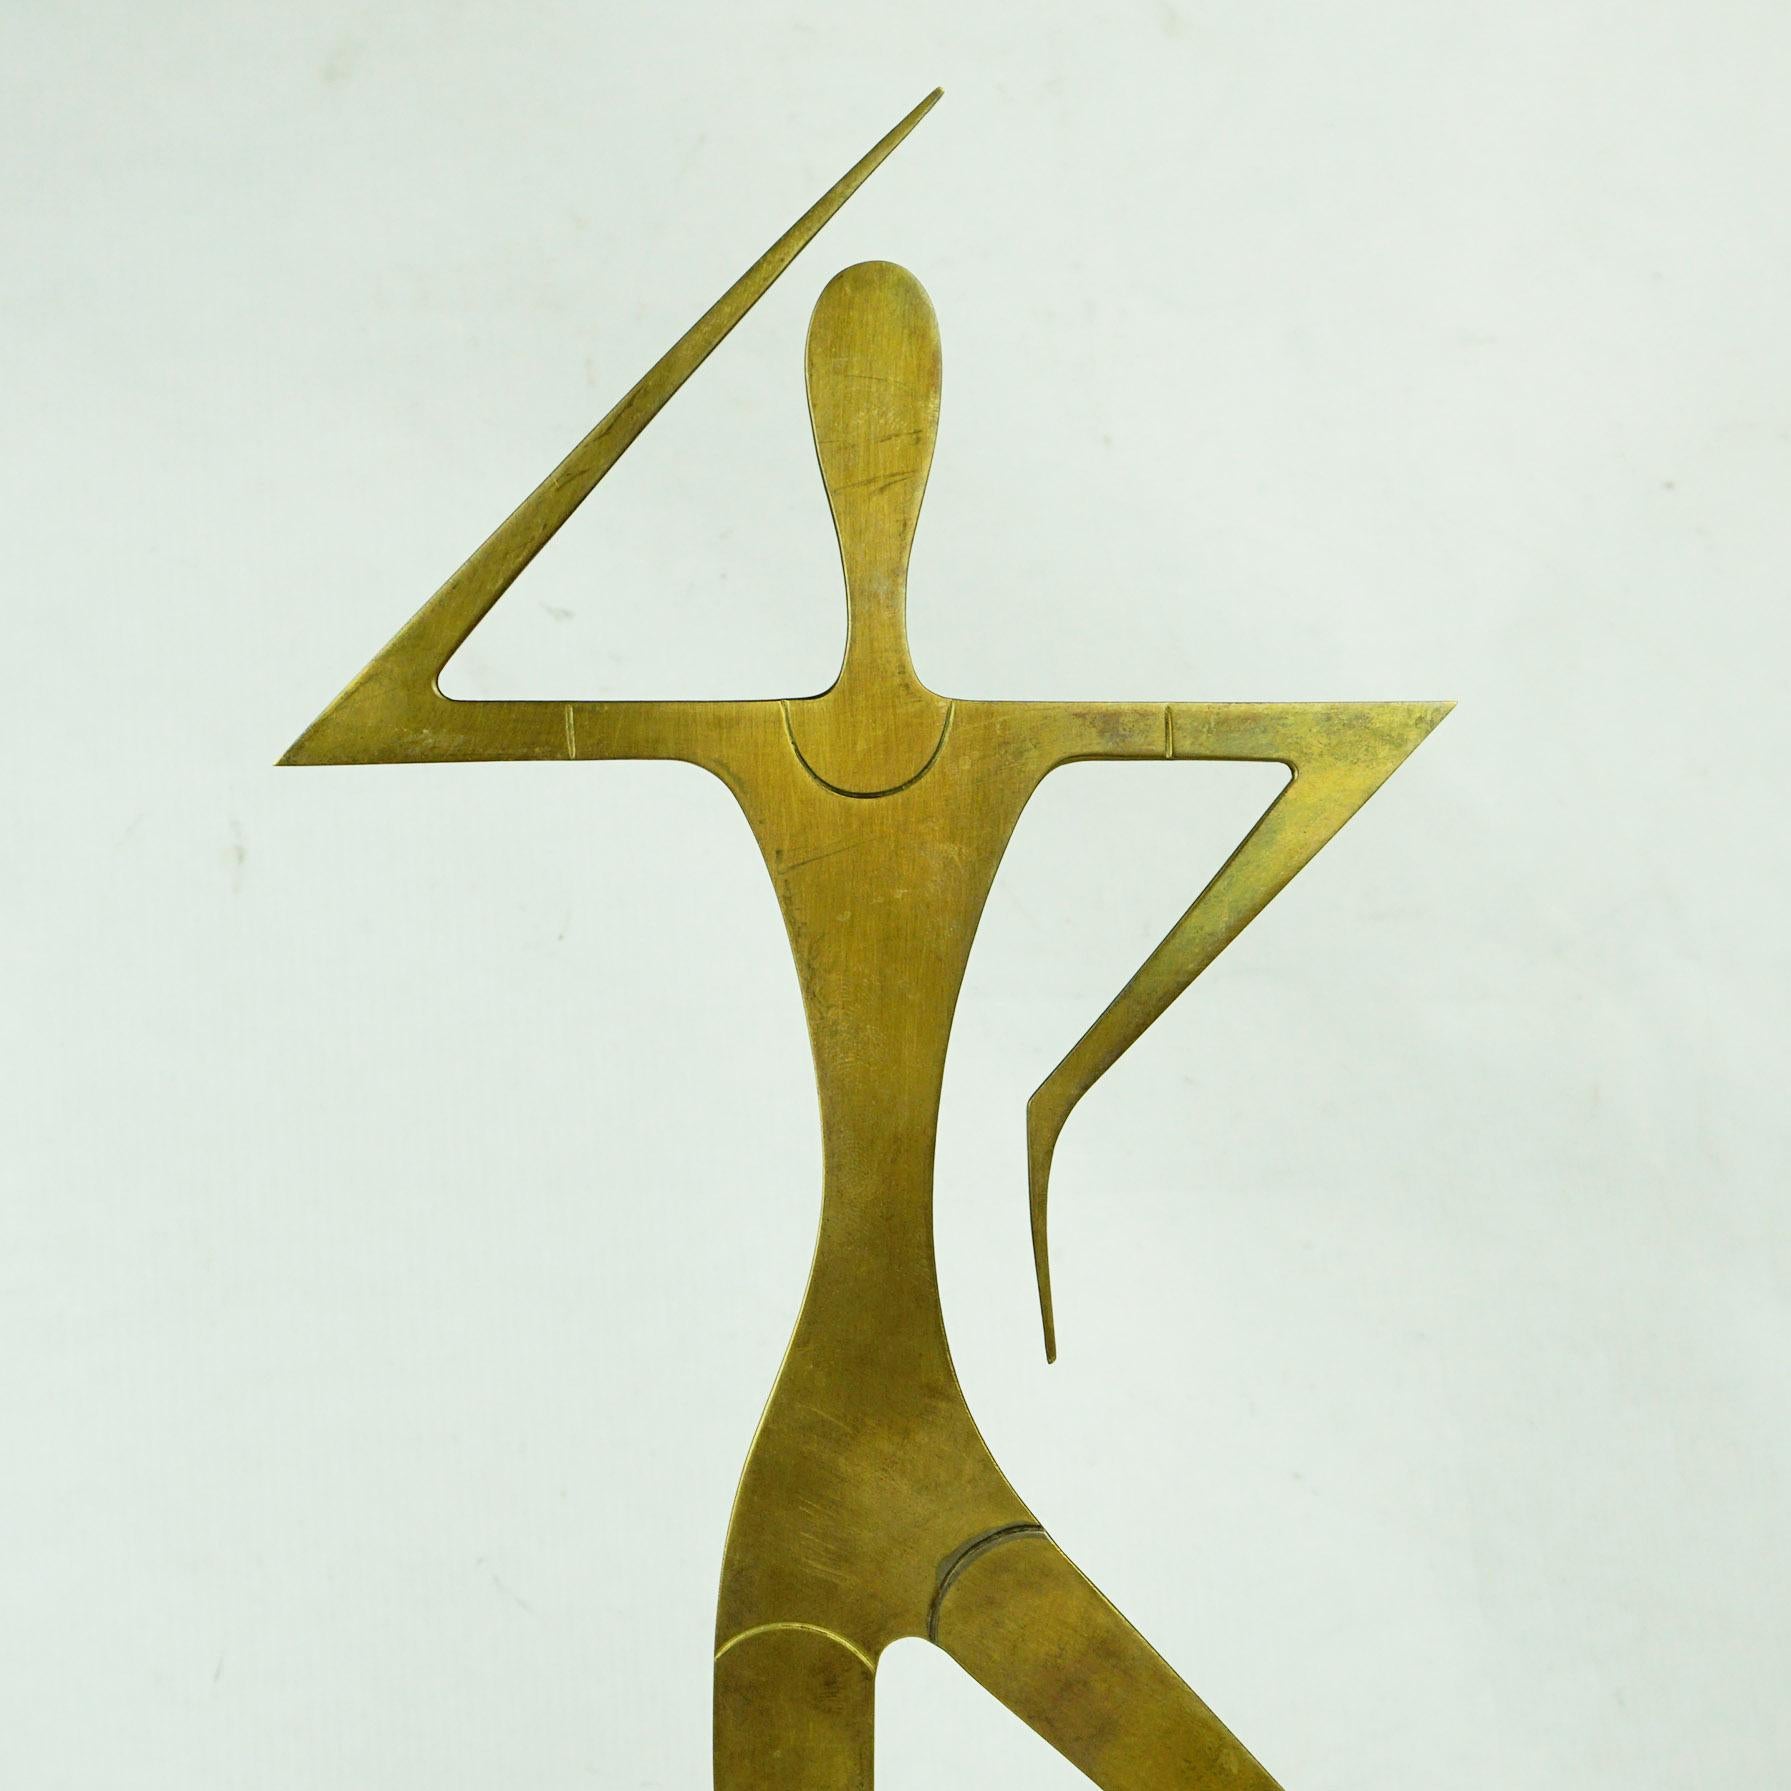 Amazing iconic brass sculpture designed by Franz Hagenauer and manufactured by Werkstätte Hagenauer Vienna in the 1970s, marked on the underside Hagenauer Wien, WHW, made in Austria. It is manufactured from a thin brass sheed and is mounted onto a